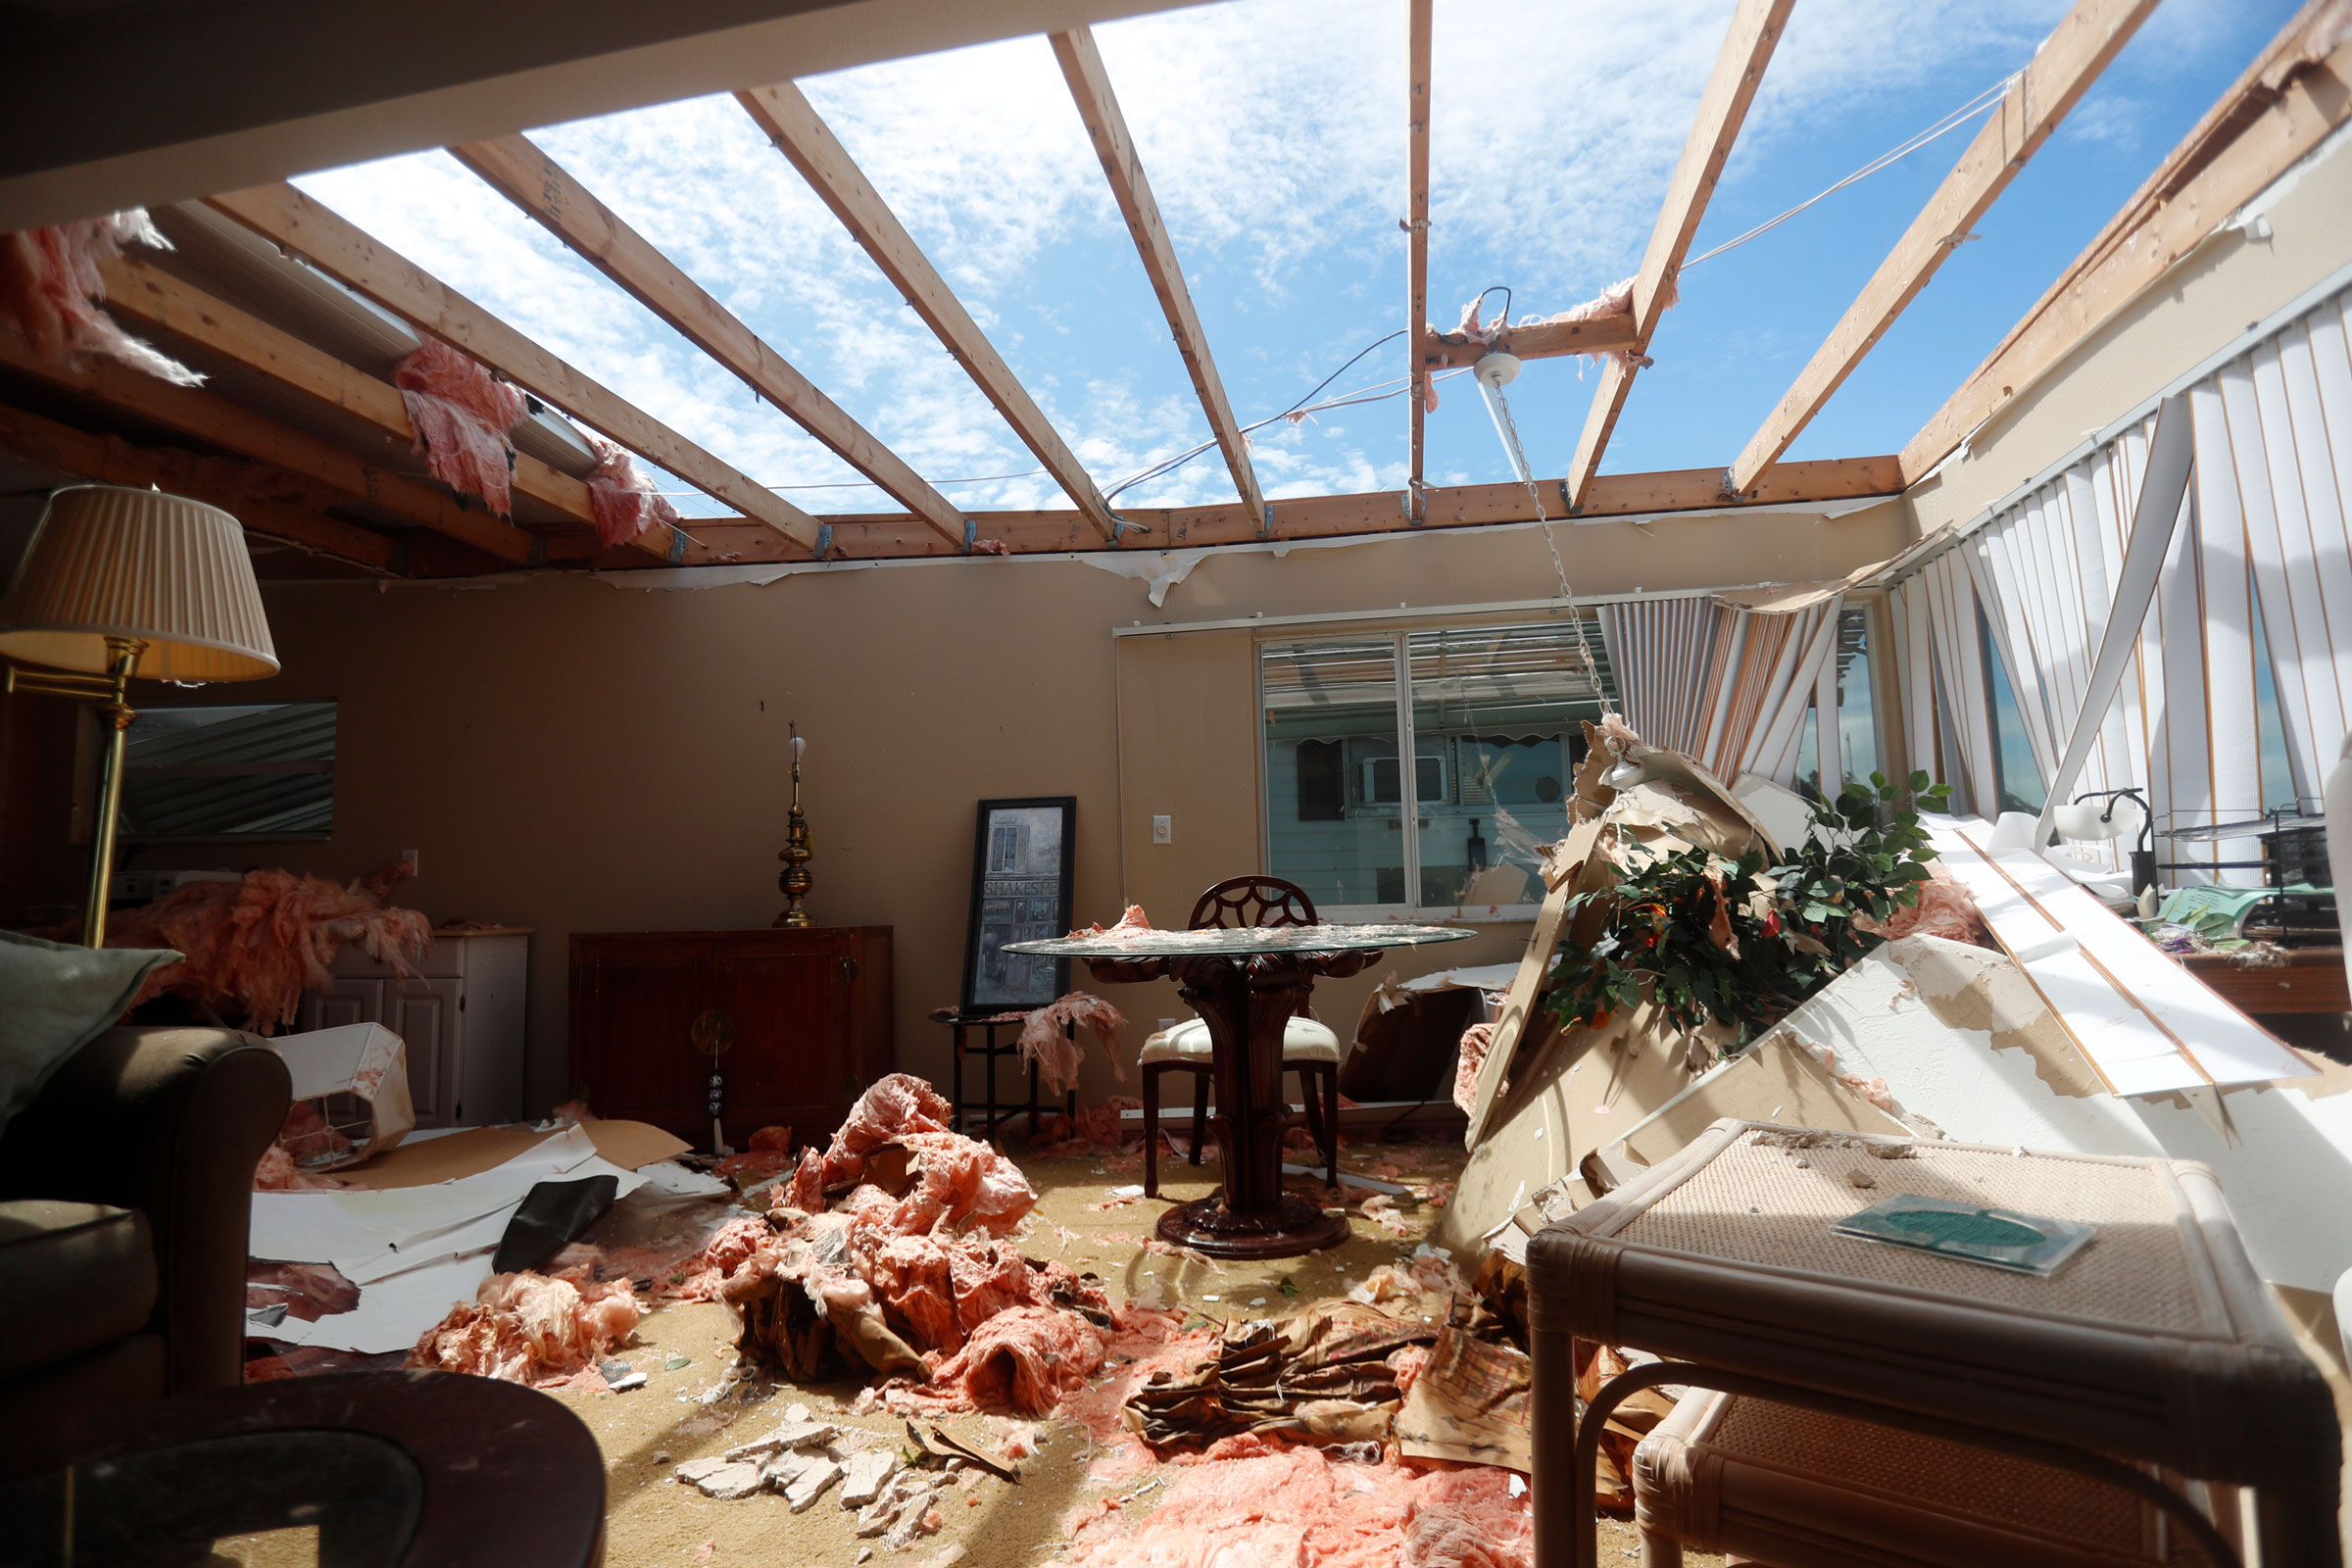 Nancy Young, 90, who lives along in the Harbor Lights community, sustained significant damage to her mobile home caused by Hurricane Ian that ravaged central Florida in Venice, Florida, on Thursday, September 29, 2022. (The Washington Post/Getty)